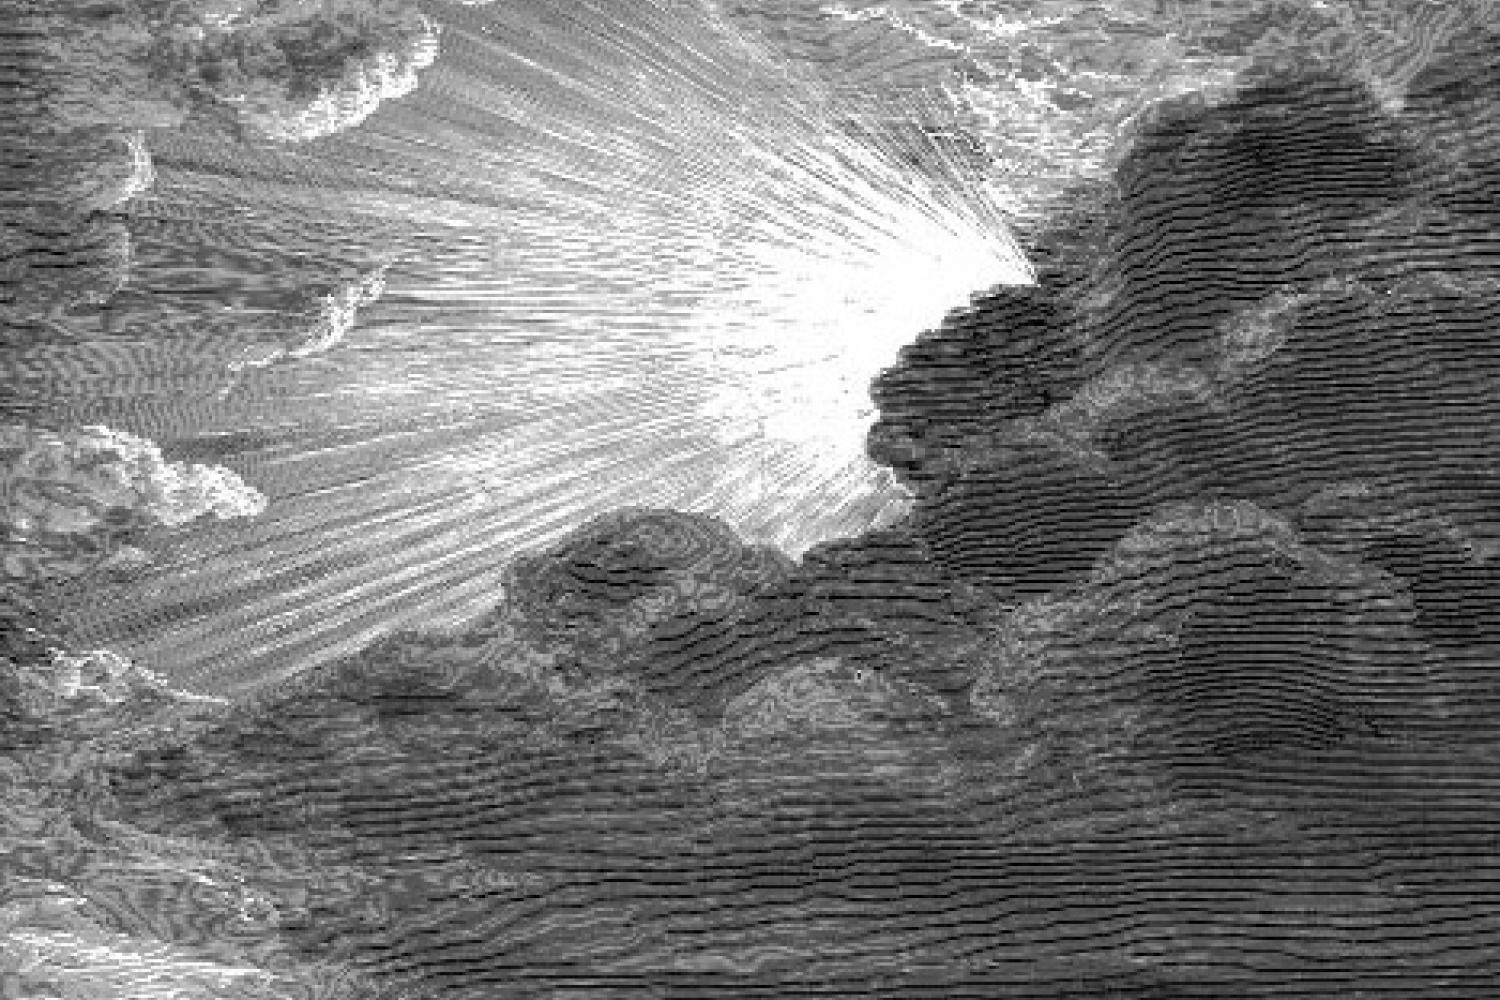 "The Creation of Light," by Gustave Dore